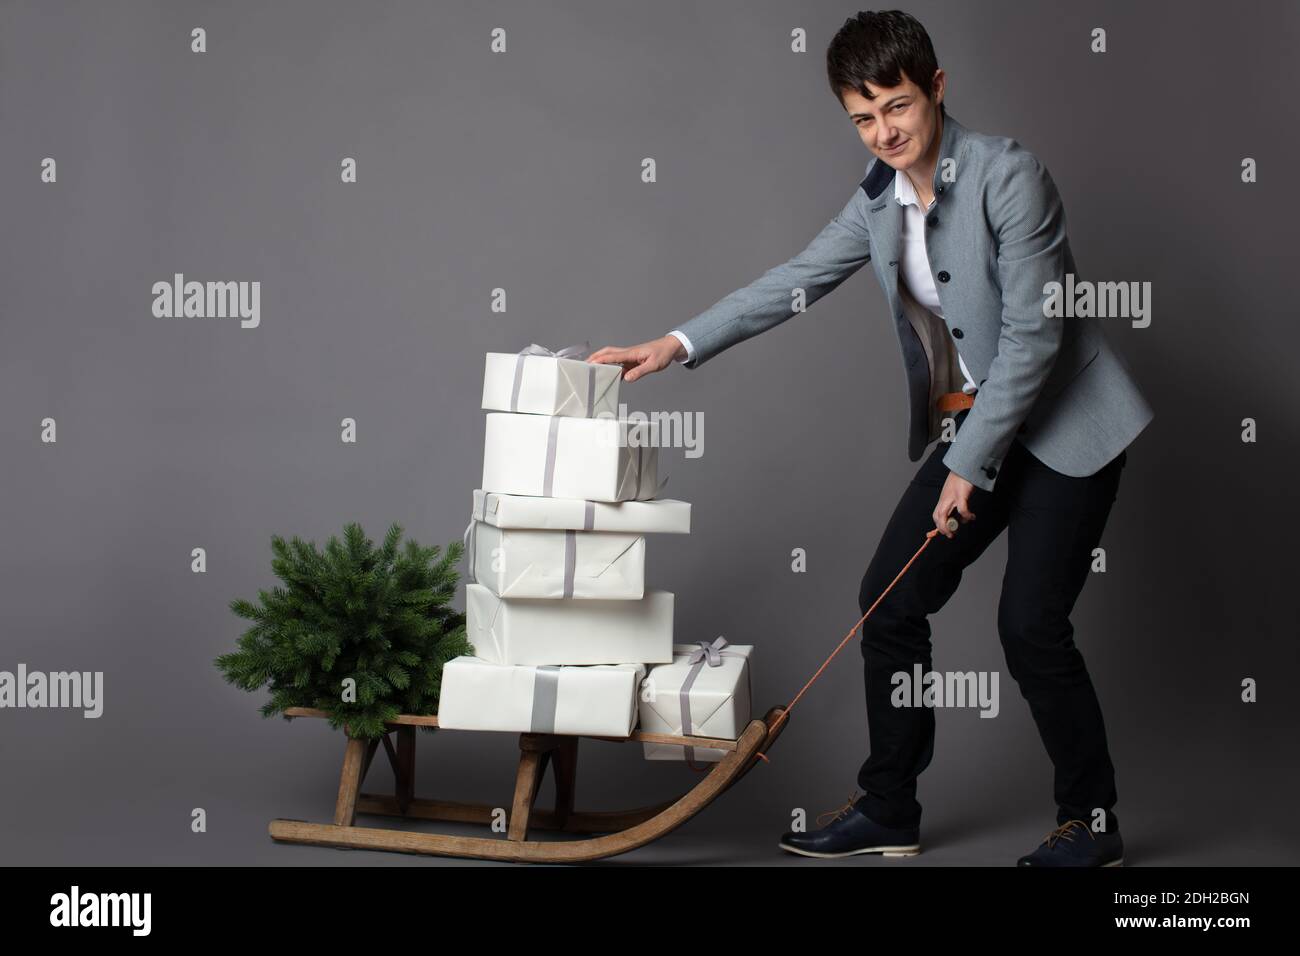 Christmas themed horizontal business portrait of a smart casual dressed female executive pulling a sleigh loaded with white and silver wrapped gift boxes on a grey background. Stock Photo